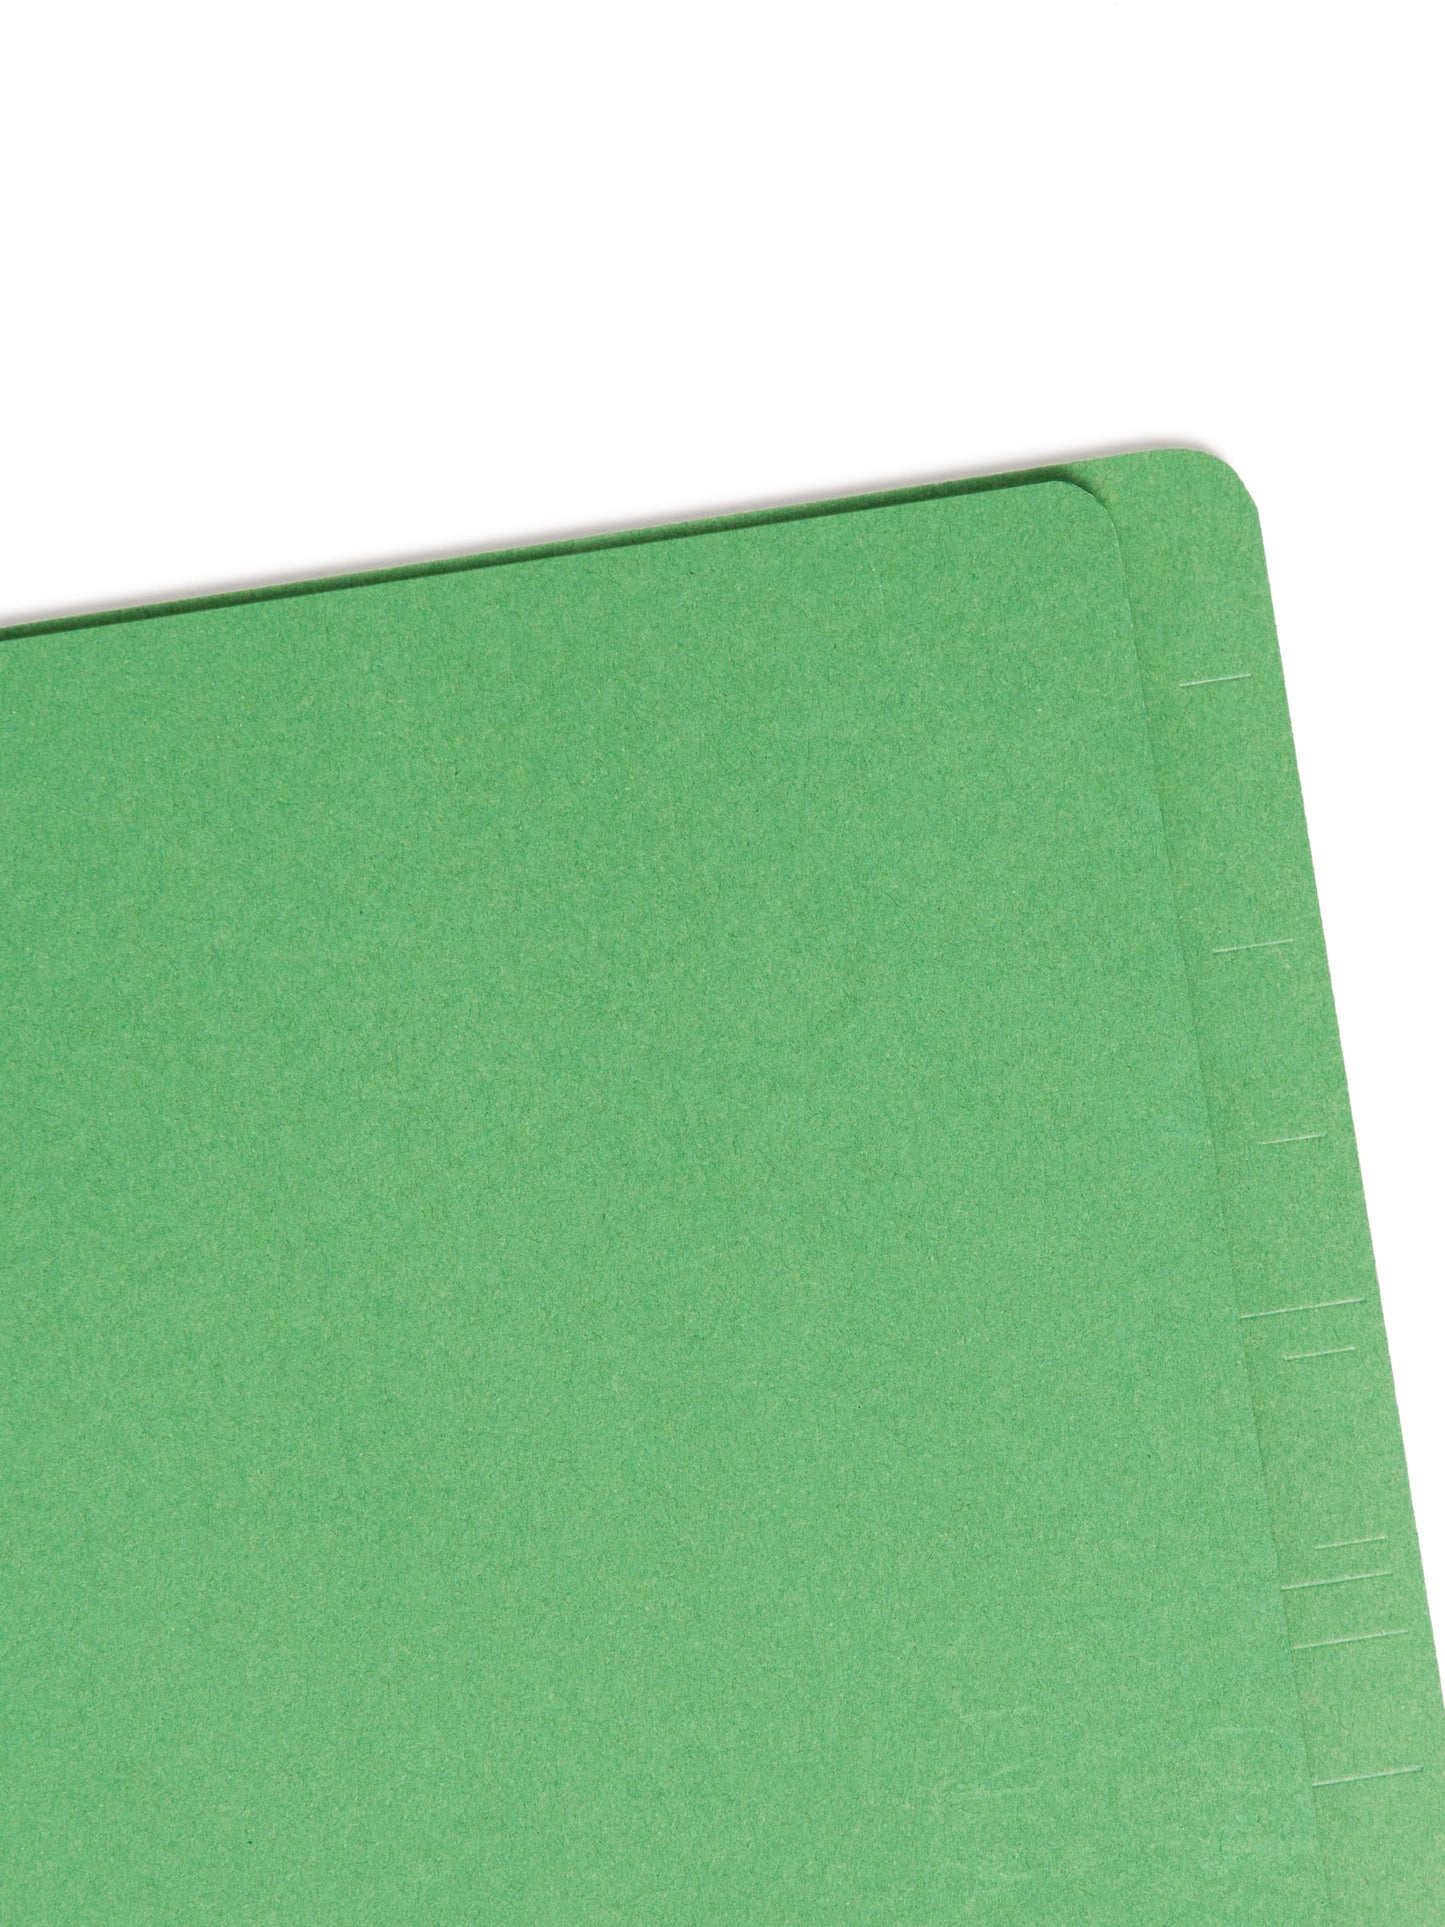 SafeSHIELD® Pressboard End Tab Classification File Folders, Straight-Cut Tab, 2 inch Expansion, 2 Divider, Green Color, Letter Size, Set of 0, 30086486267855